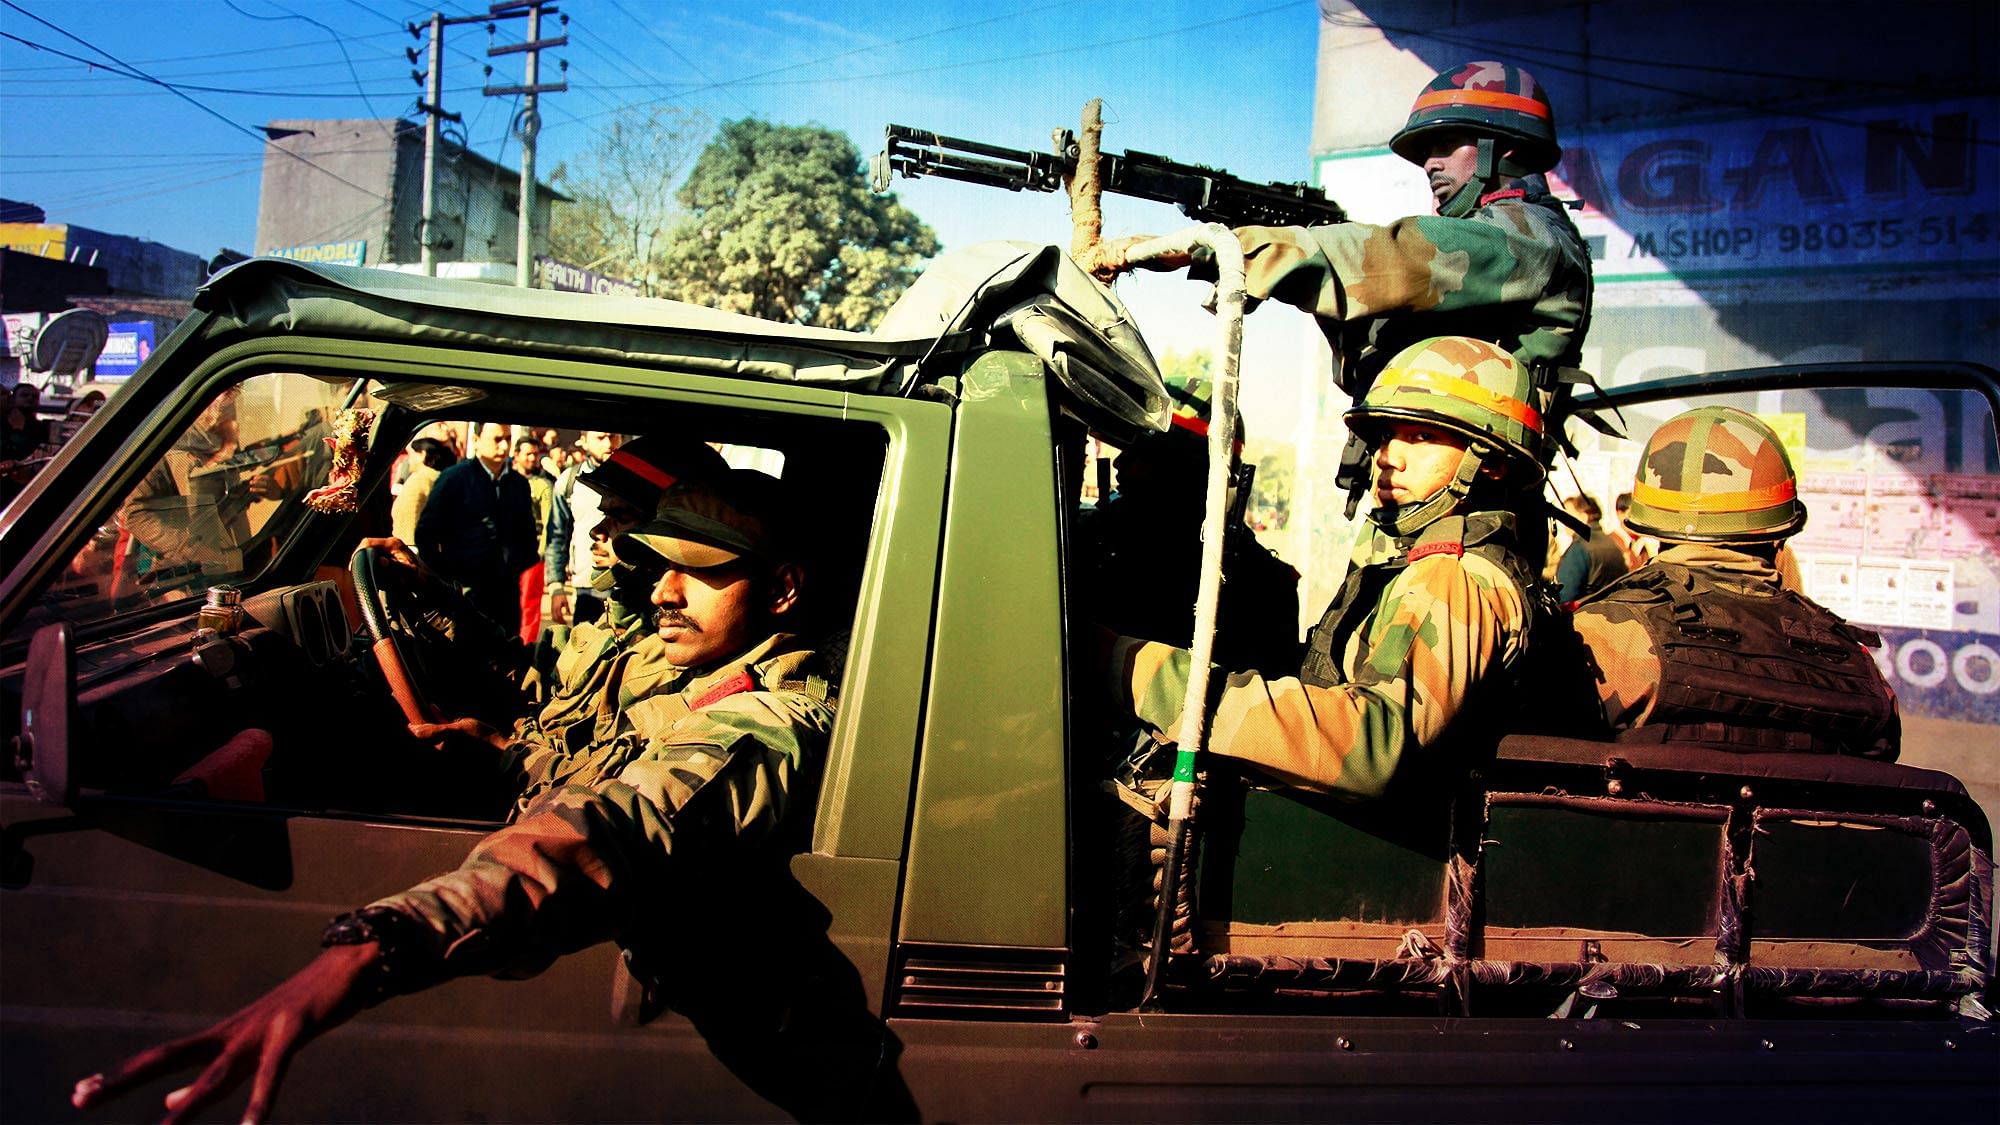 Armed forces during counter-terror operation in Pathankot, Punjab.  (Photo:  <b>The Quint</b>)